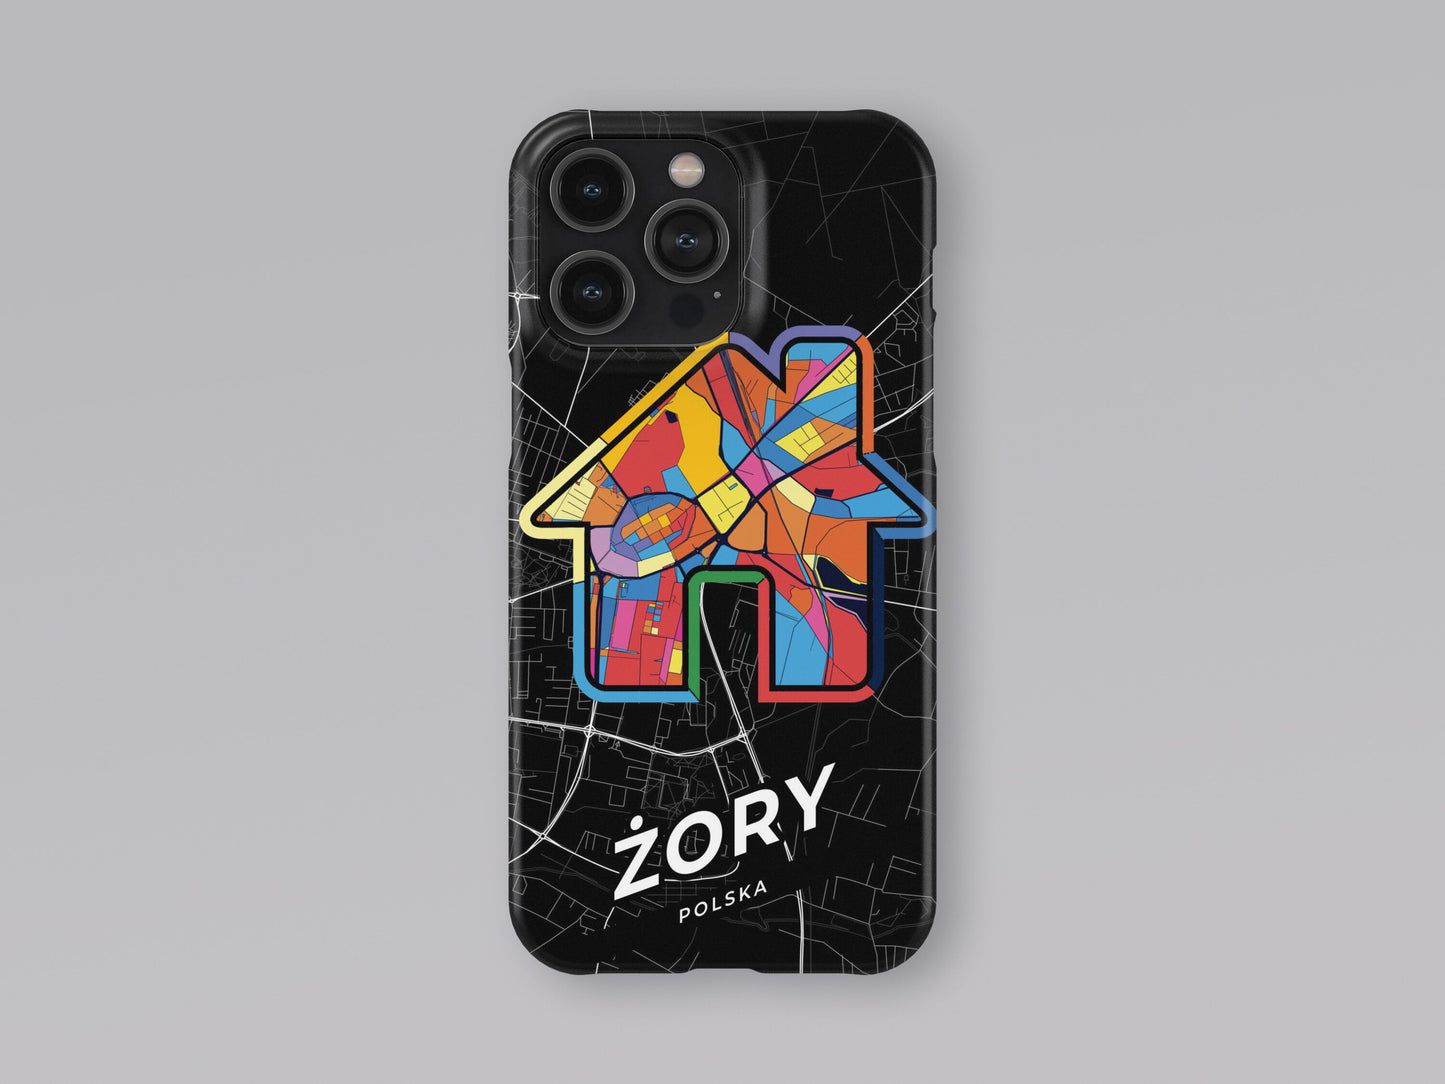 Żory Poland slim phone case with colorful icon 3